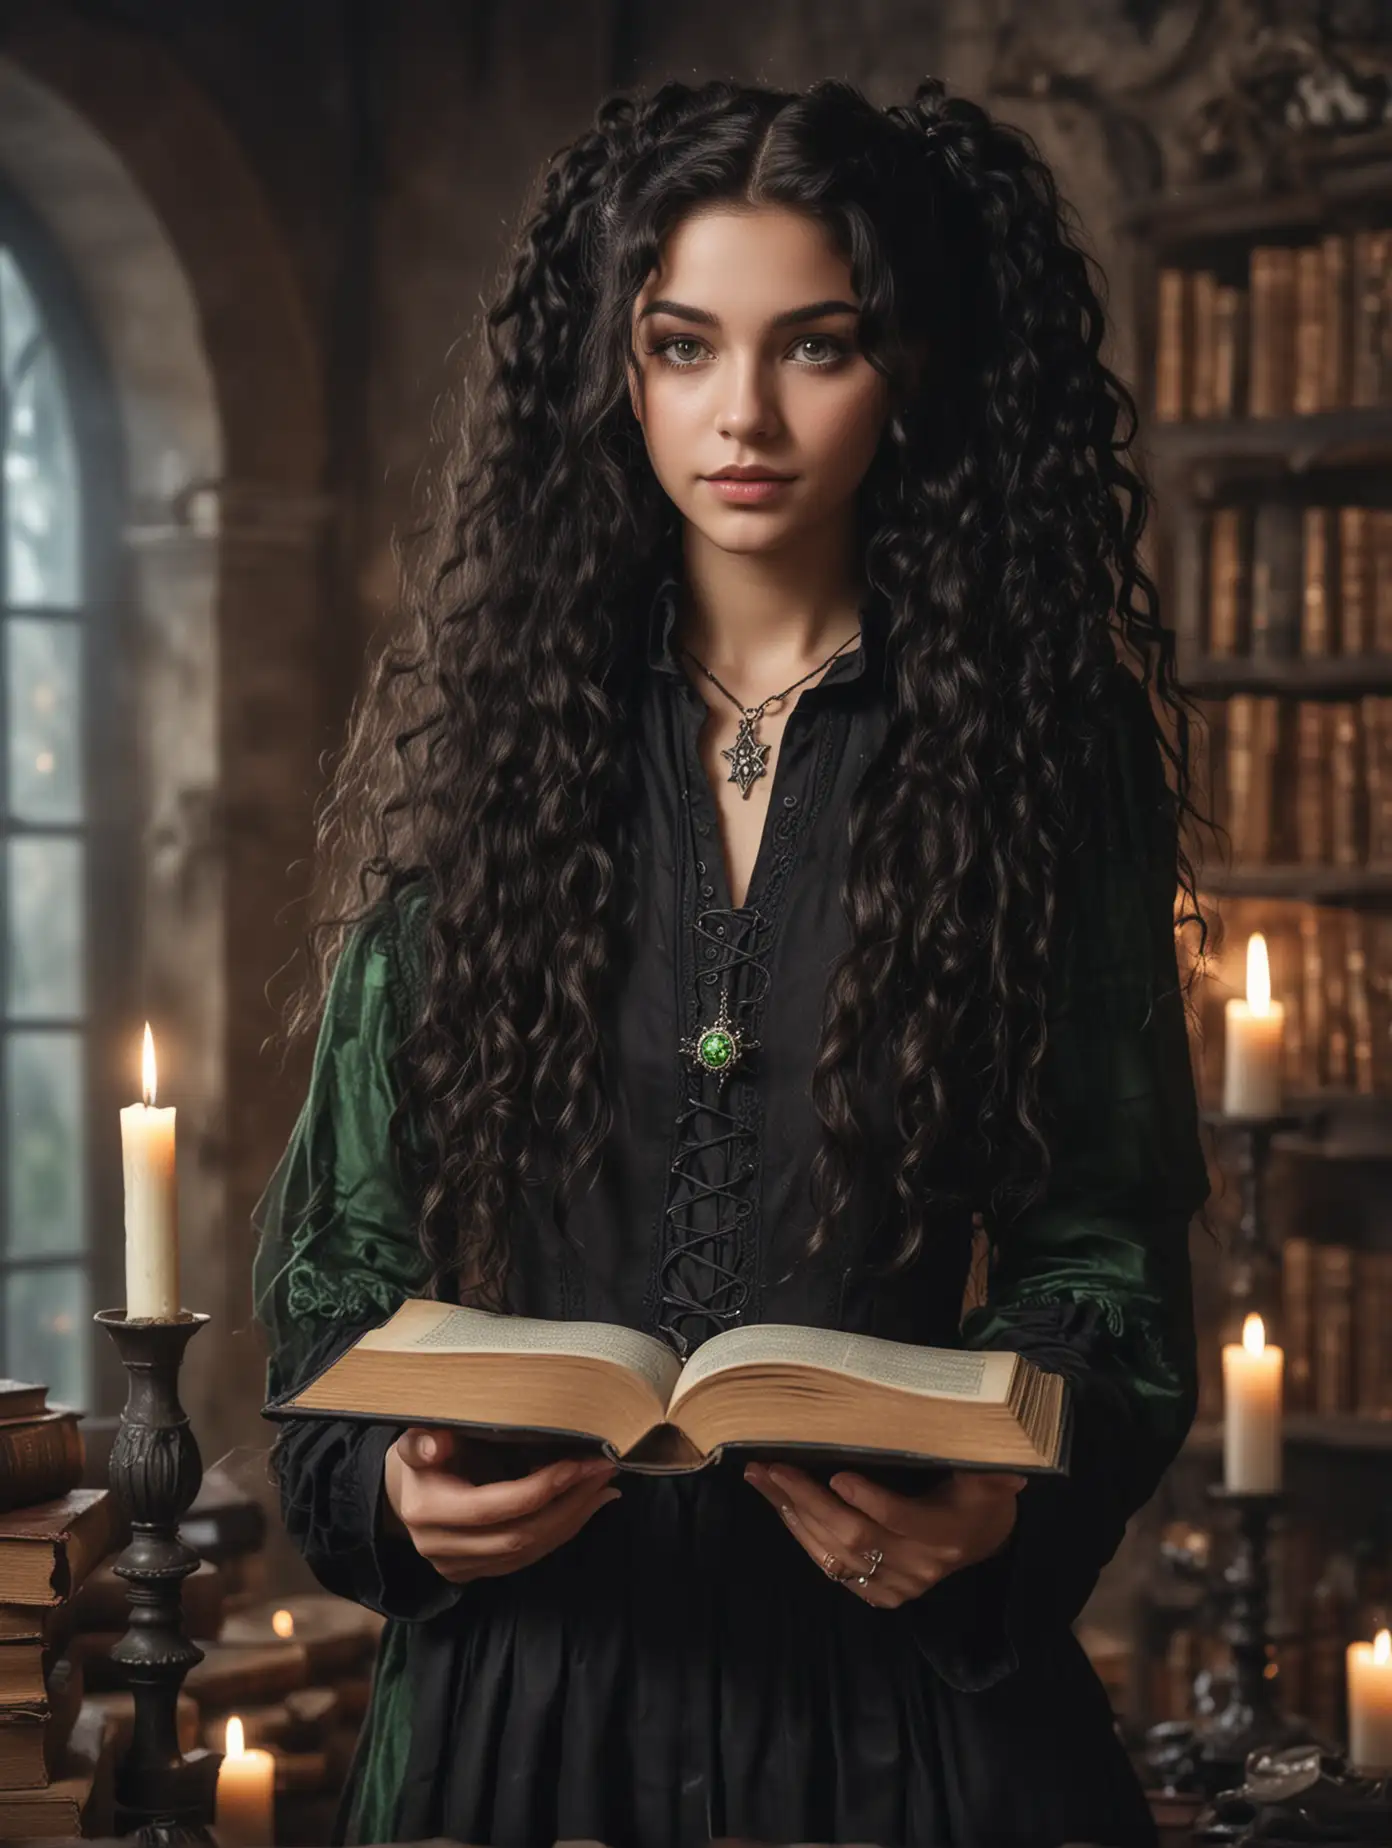 Young Witch with Long Curly Black Hair and Spellbook in Enchanted Room